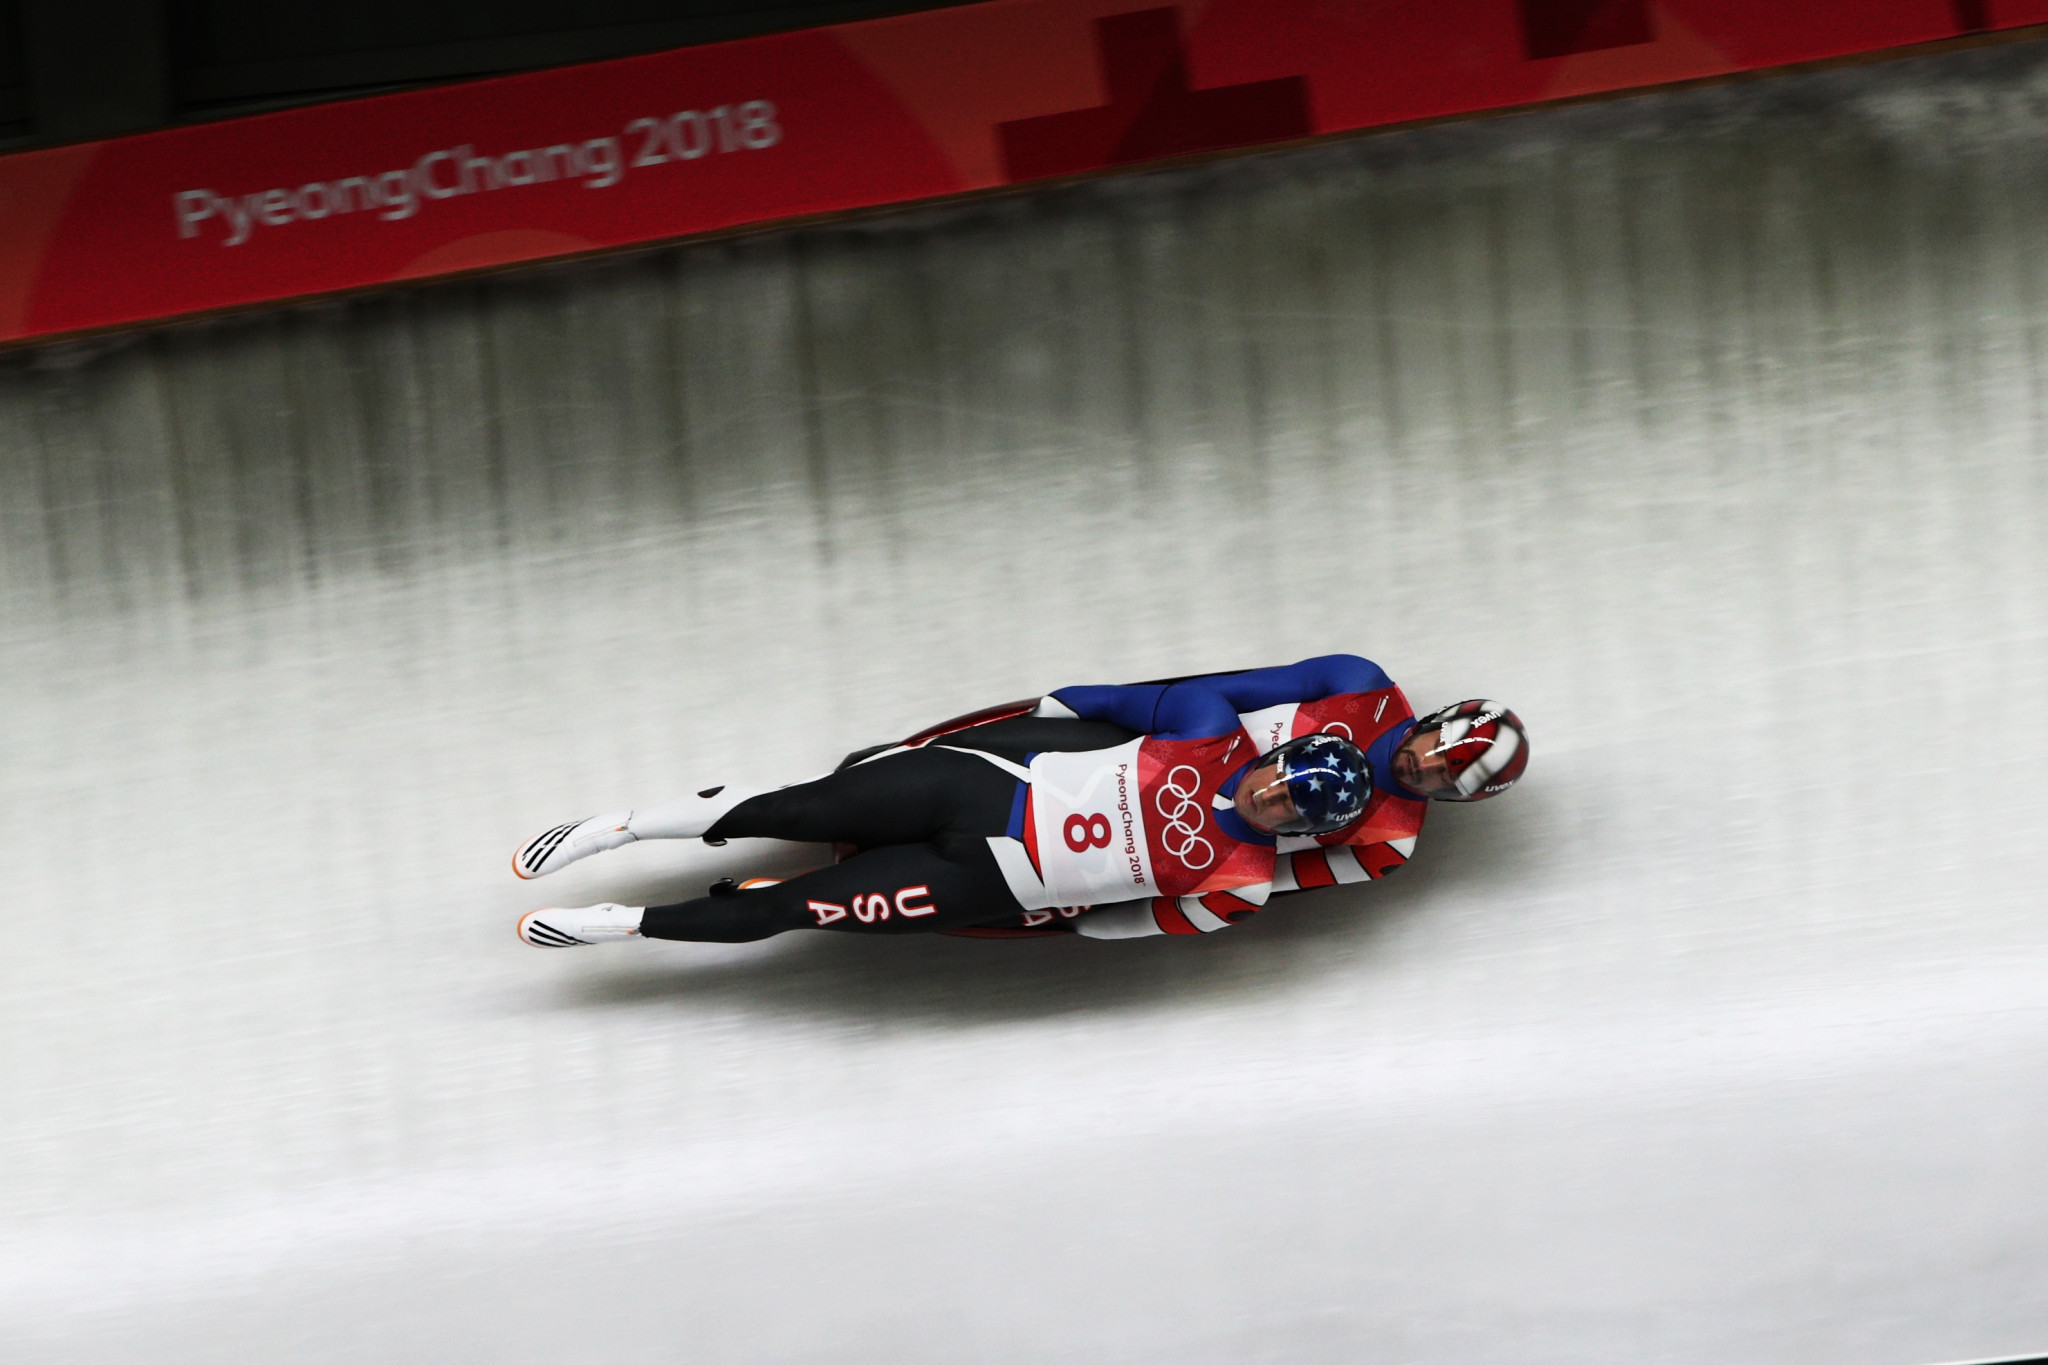 USA Luge is aiming to improve performances ahead of Beijing 2022 ©Getty Images